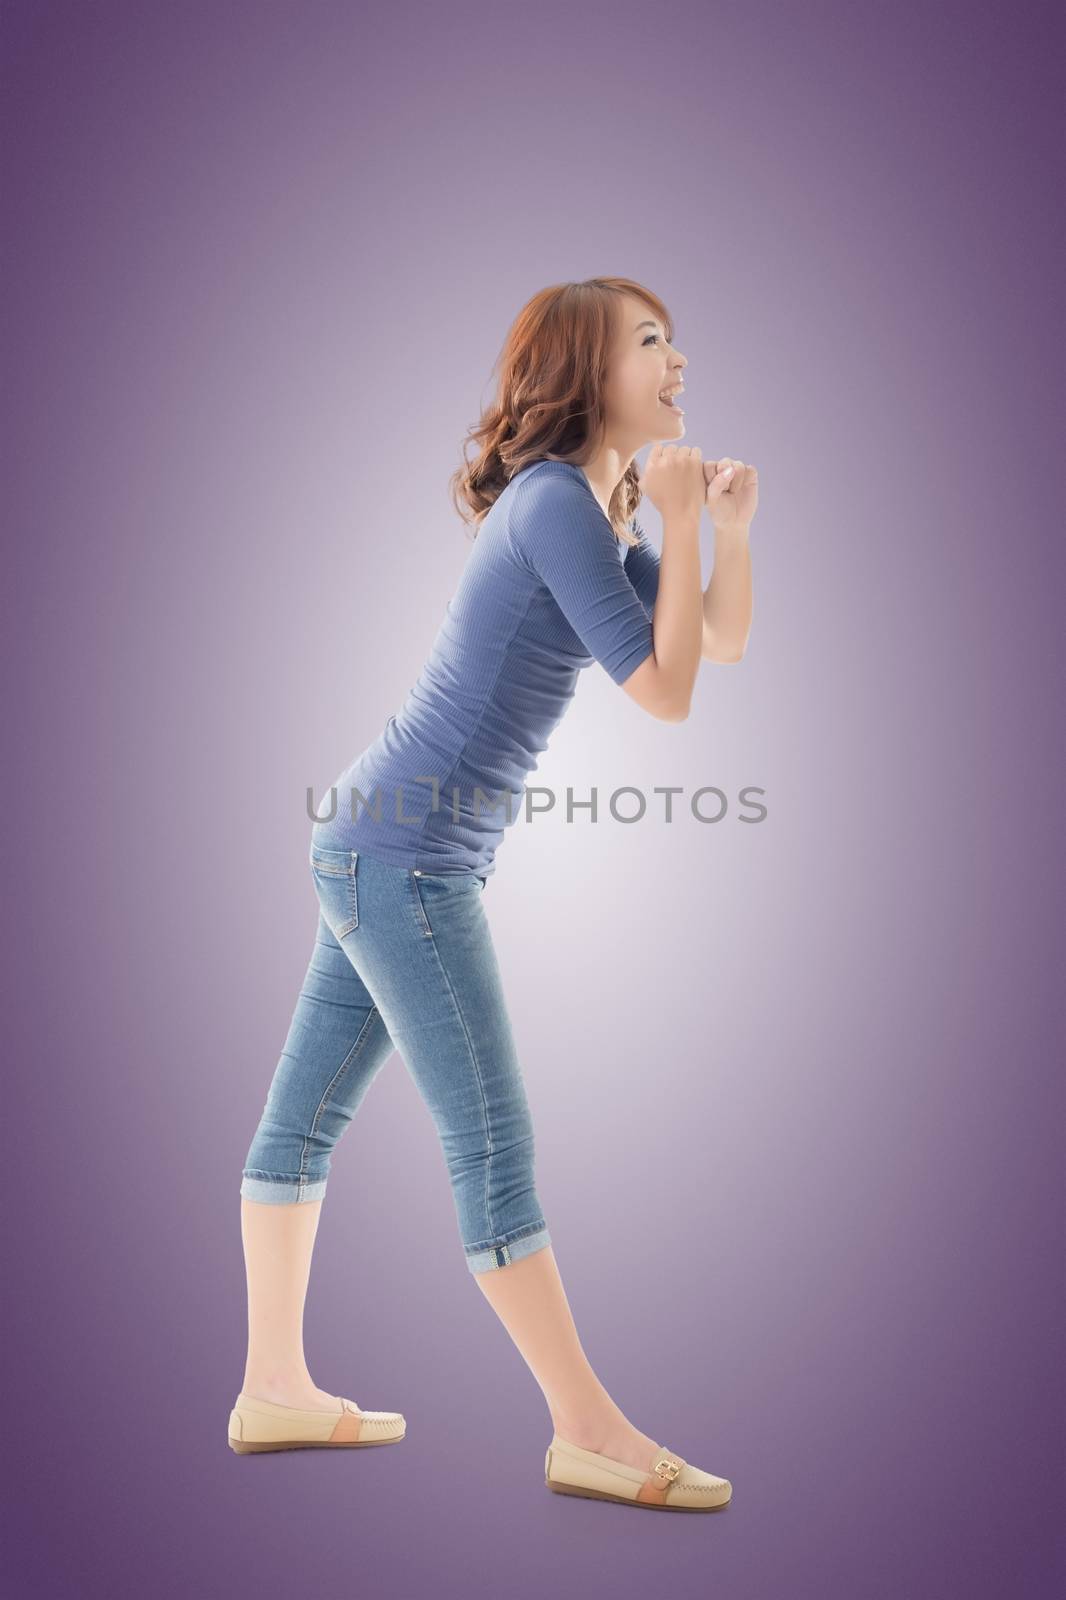 Pull pose, full length portrait of Asian isolated.